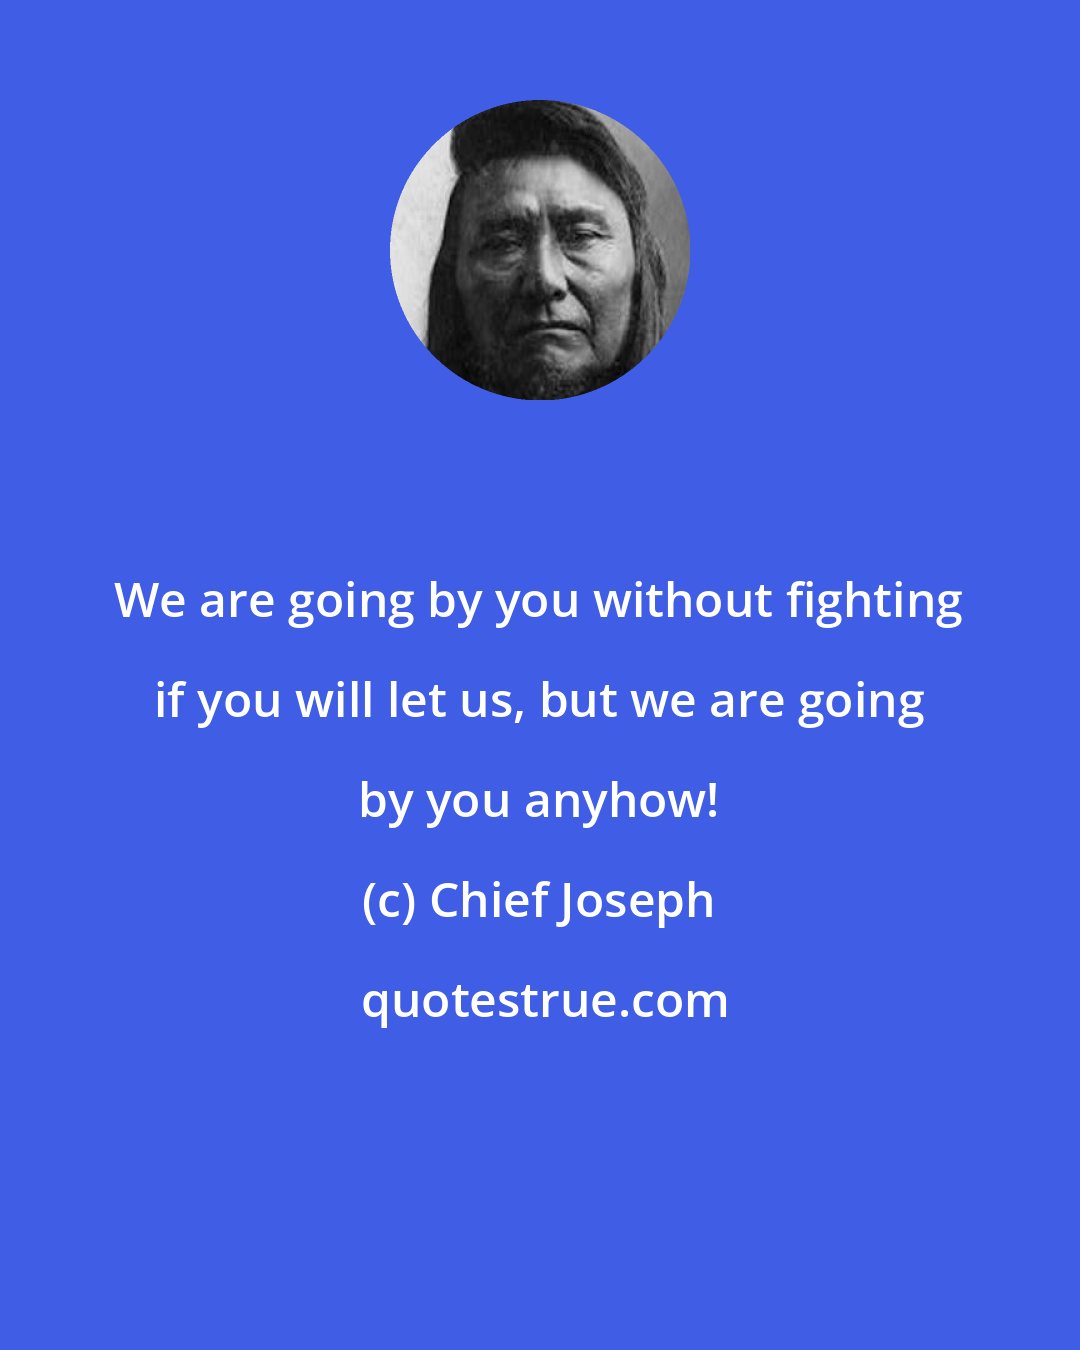 Chief Joseph: We are going by you without fighting if you will let us, but we are going by you anyhow!